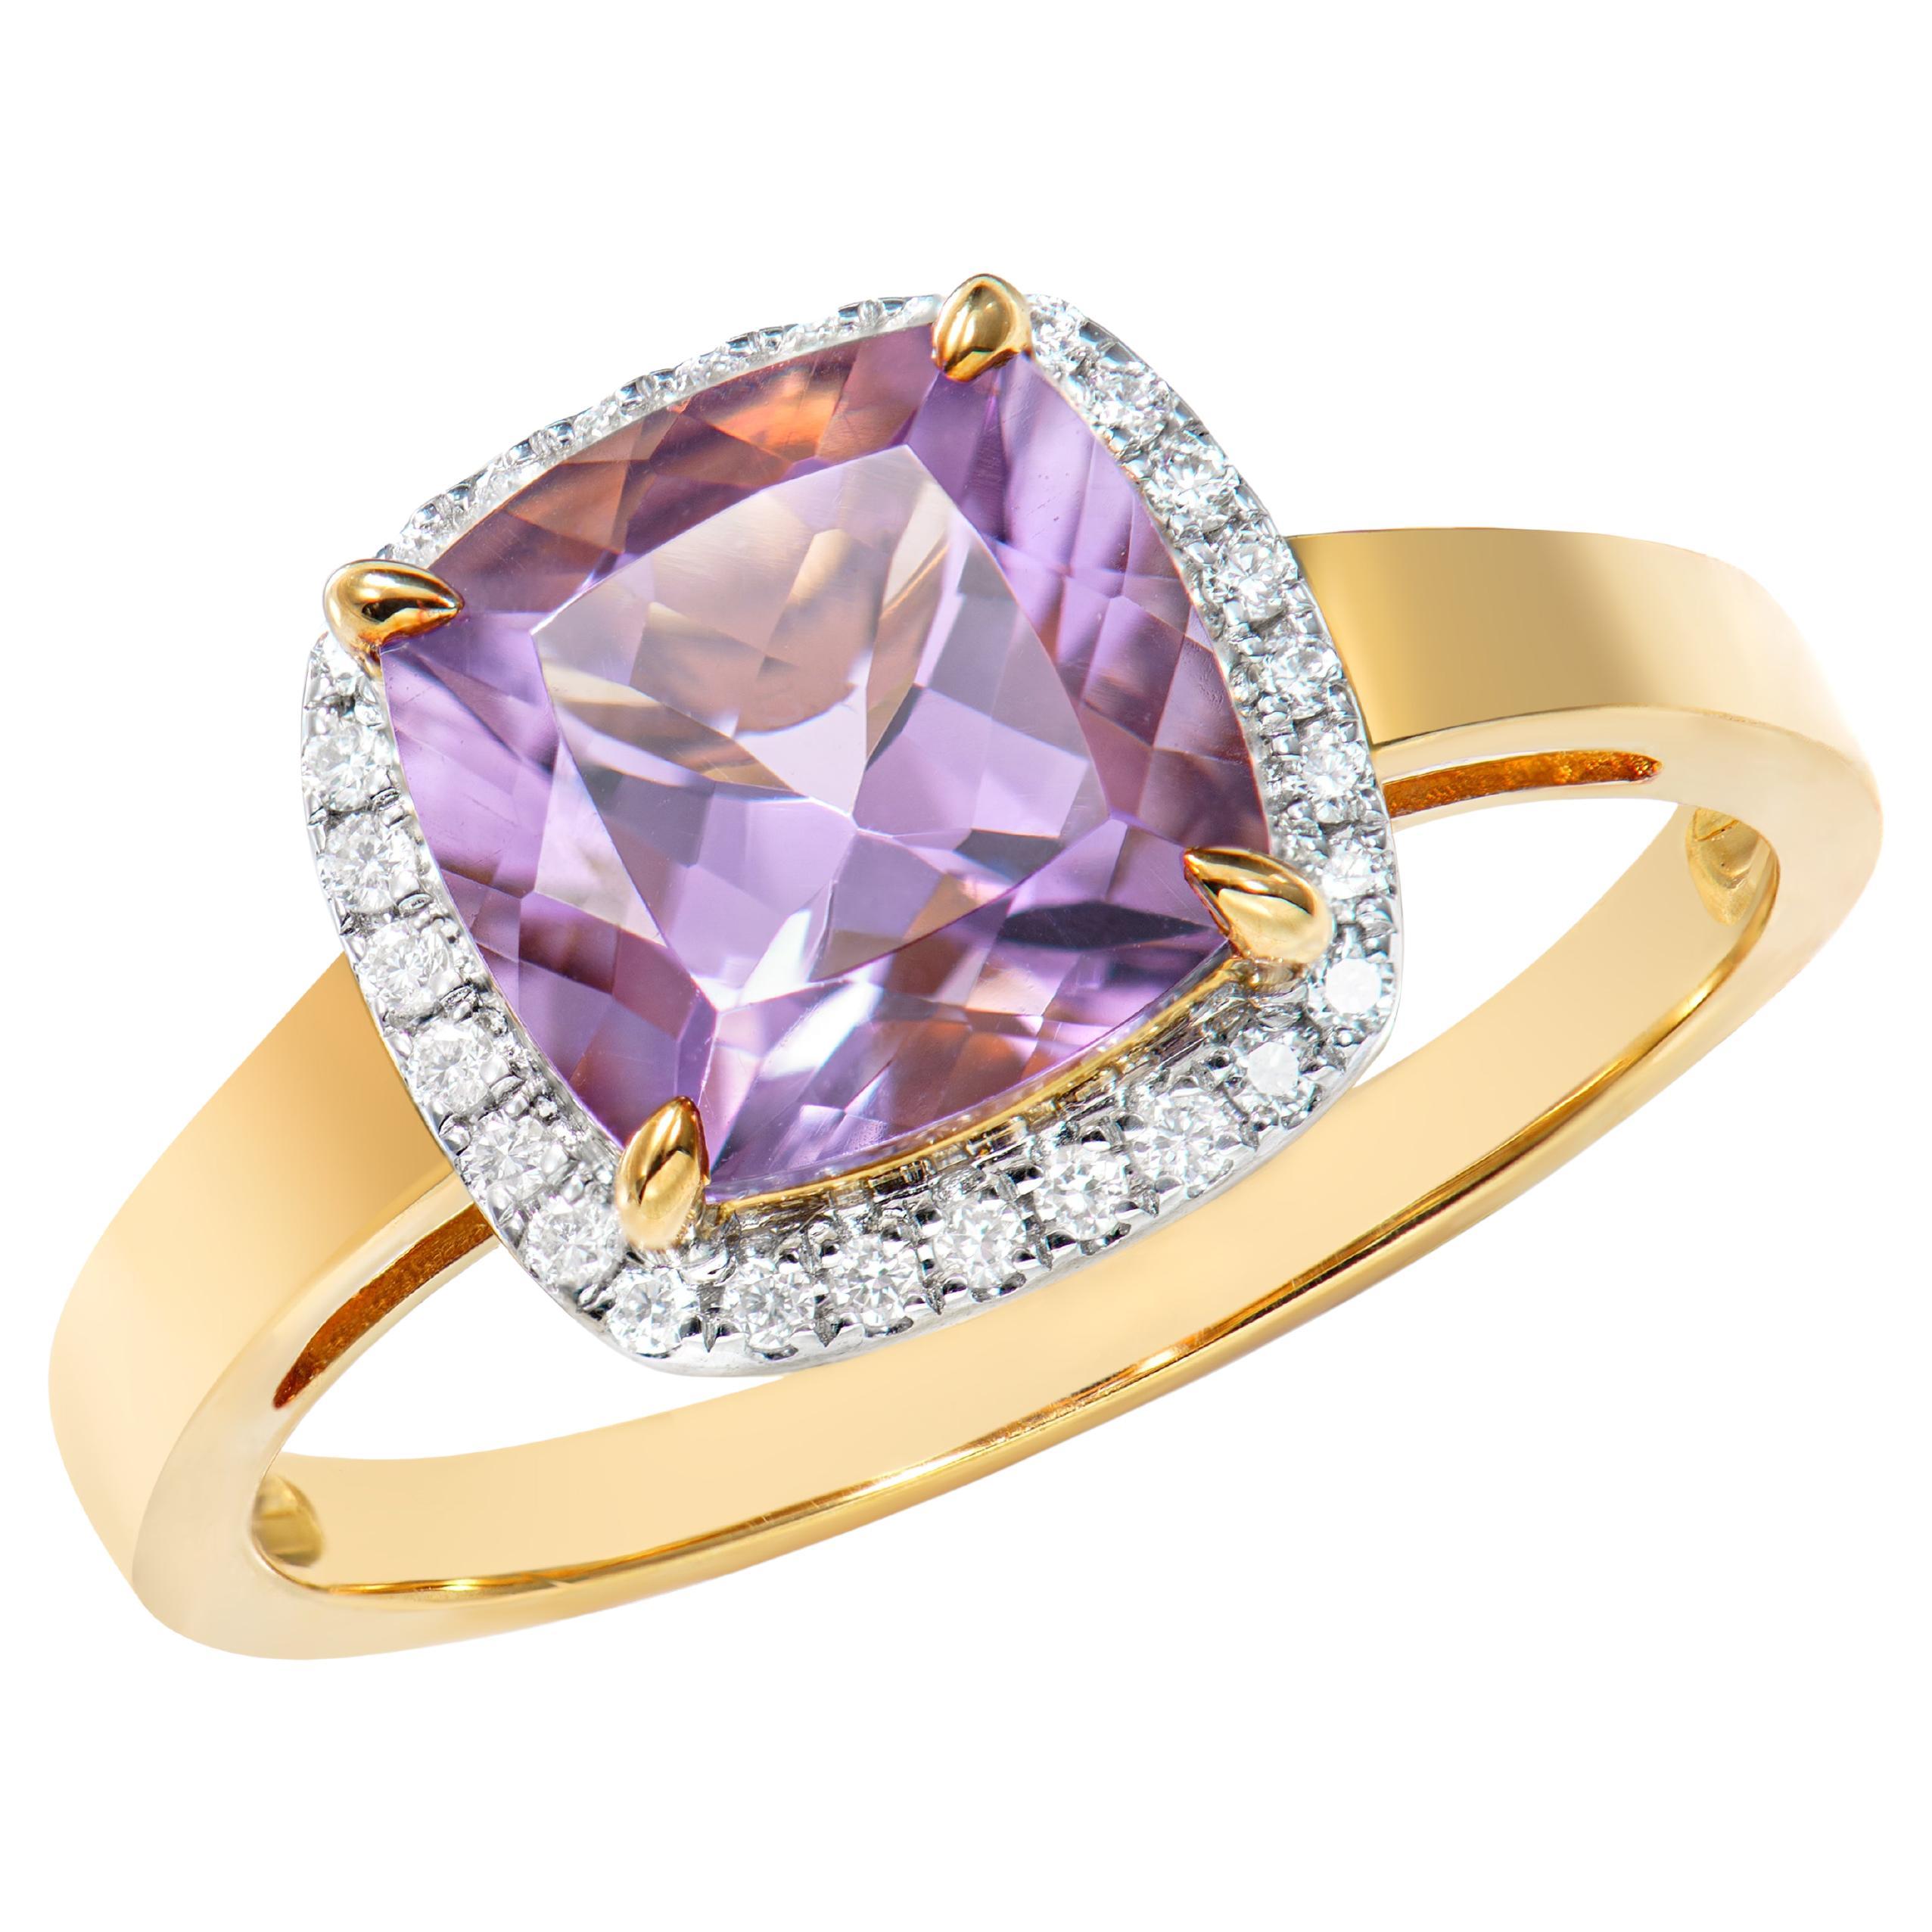 2.11 Carat Amethyst Fancy Ring in 18Karat Yellow Gold with White Diamond.   For Sale